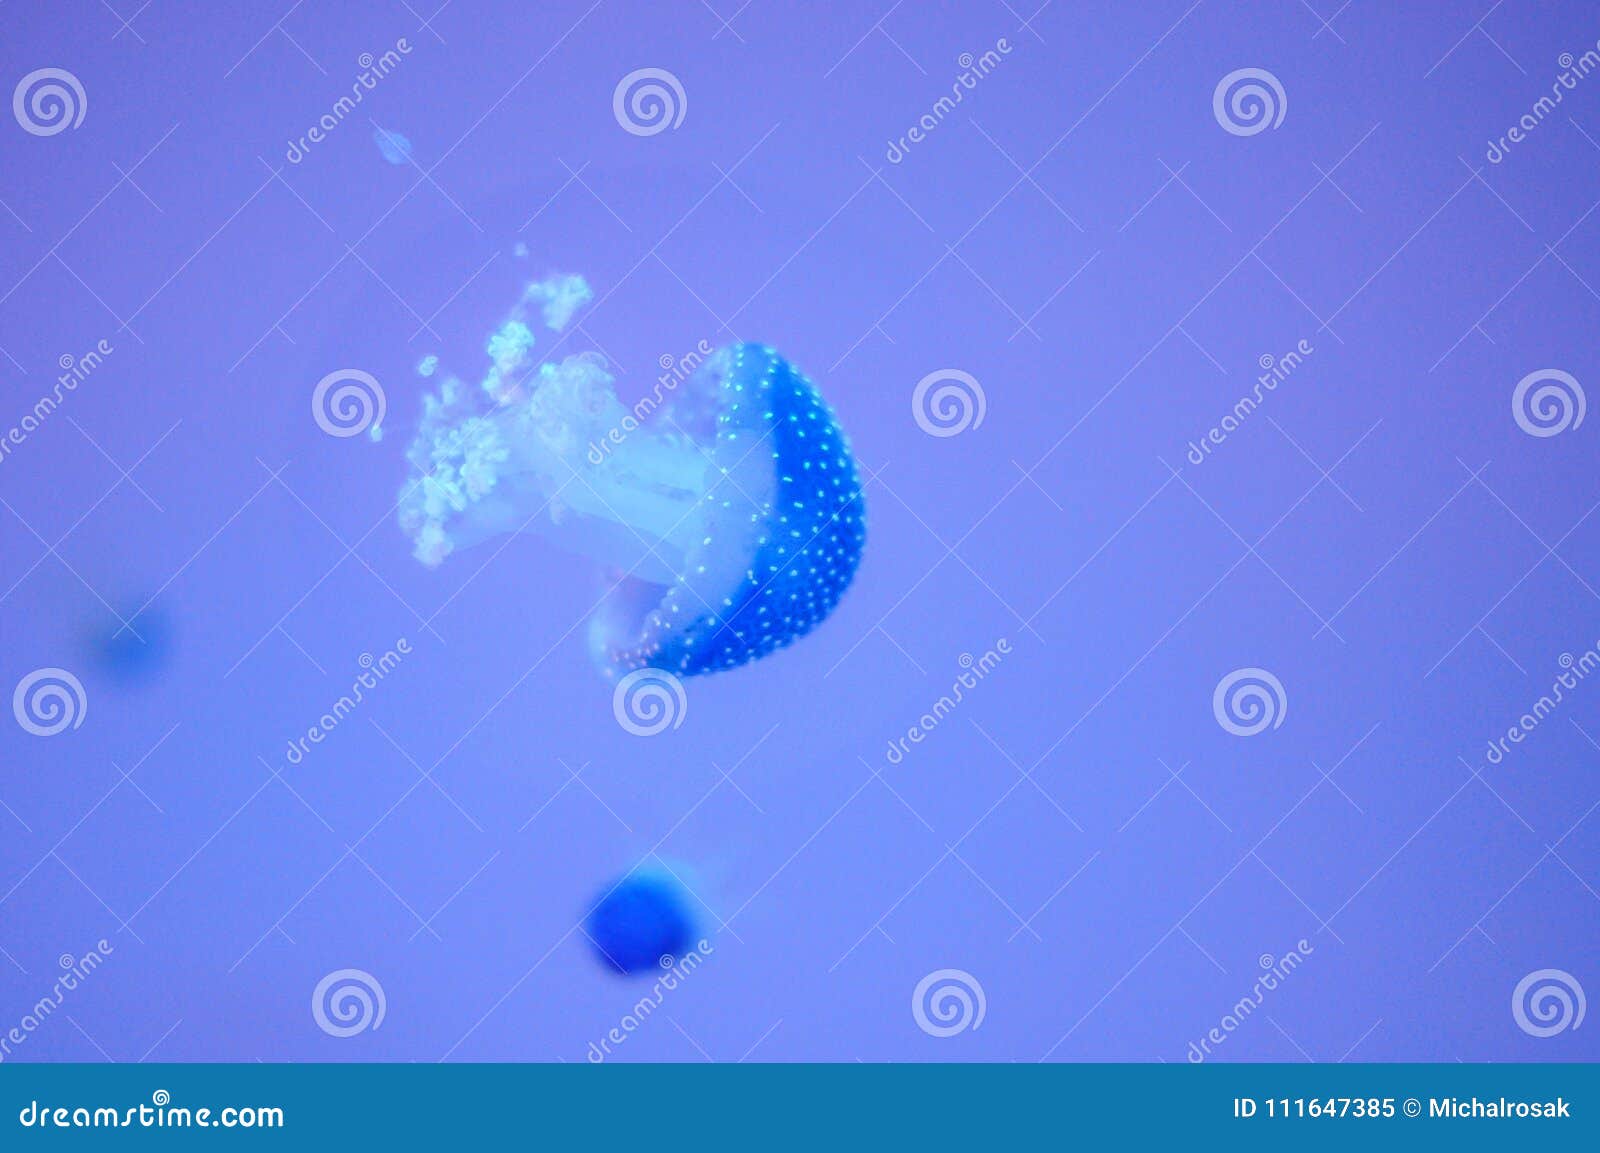 glowing jellyfish swimming in the aquarium tank with other medusas. magic coral reef wildlife. blue background